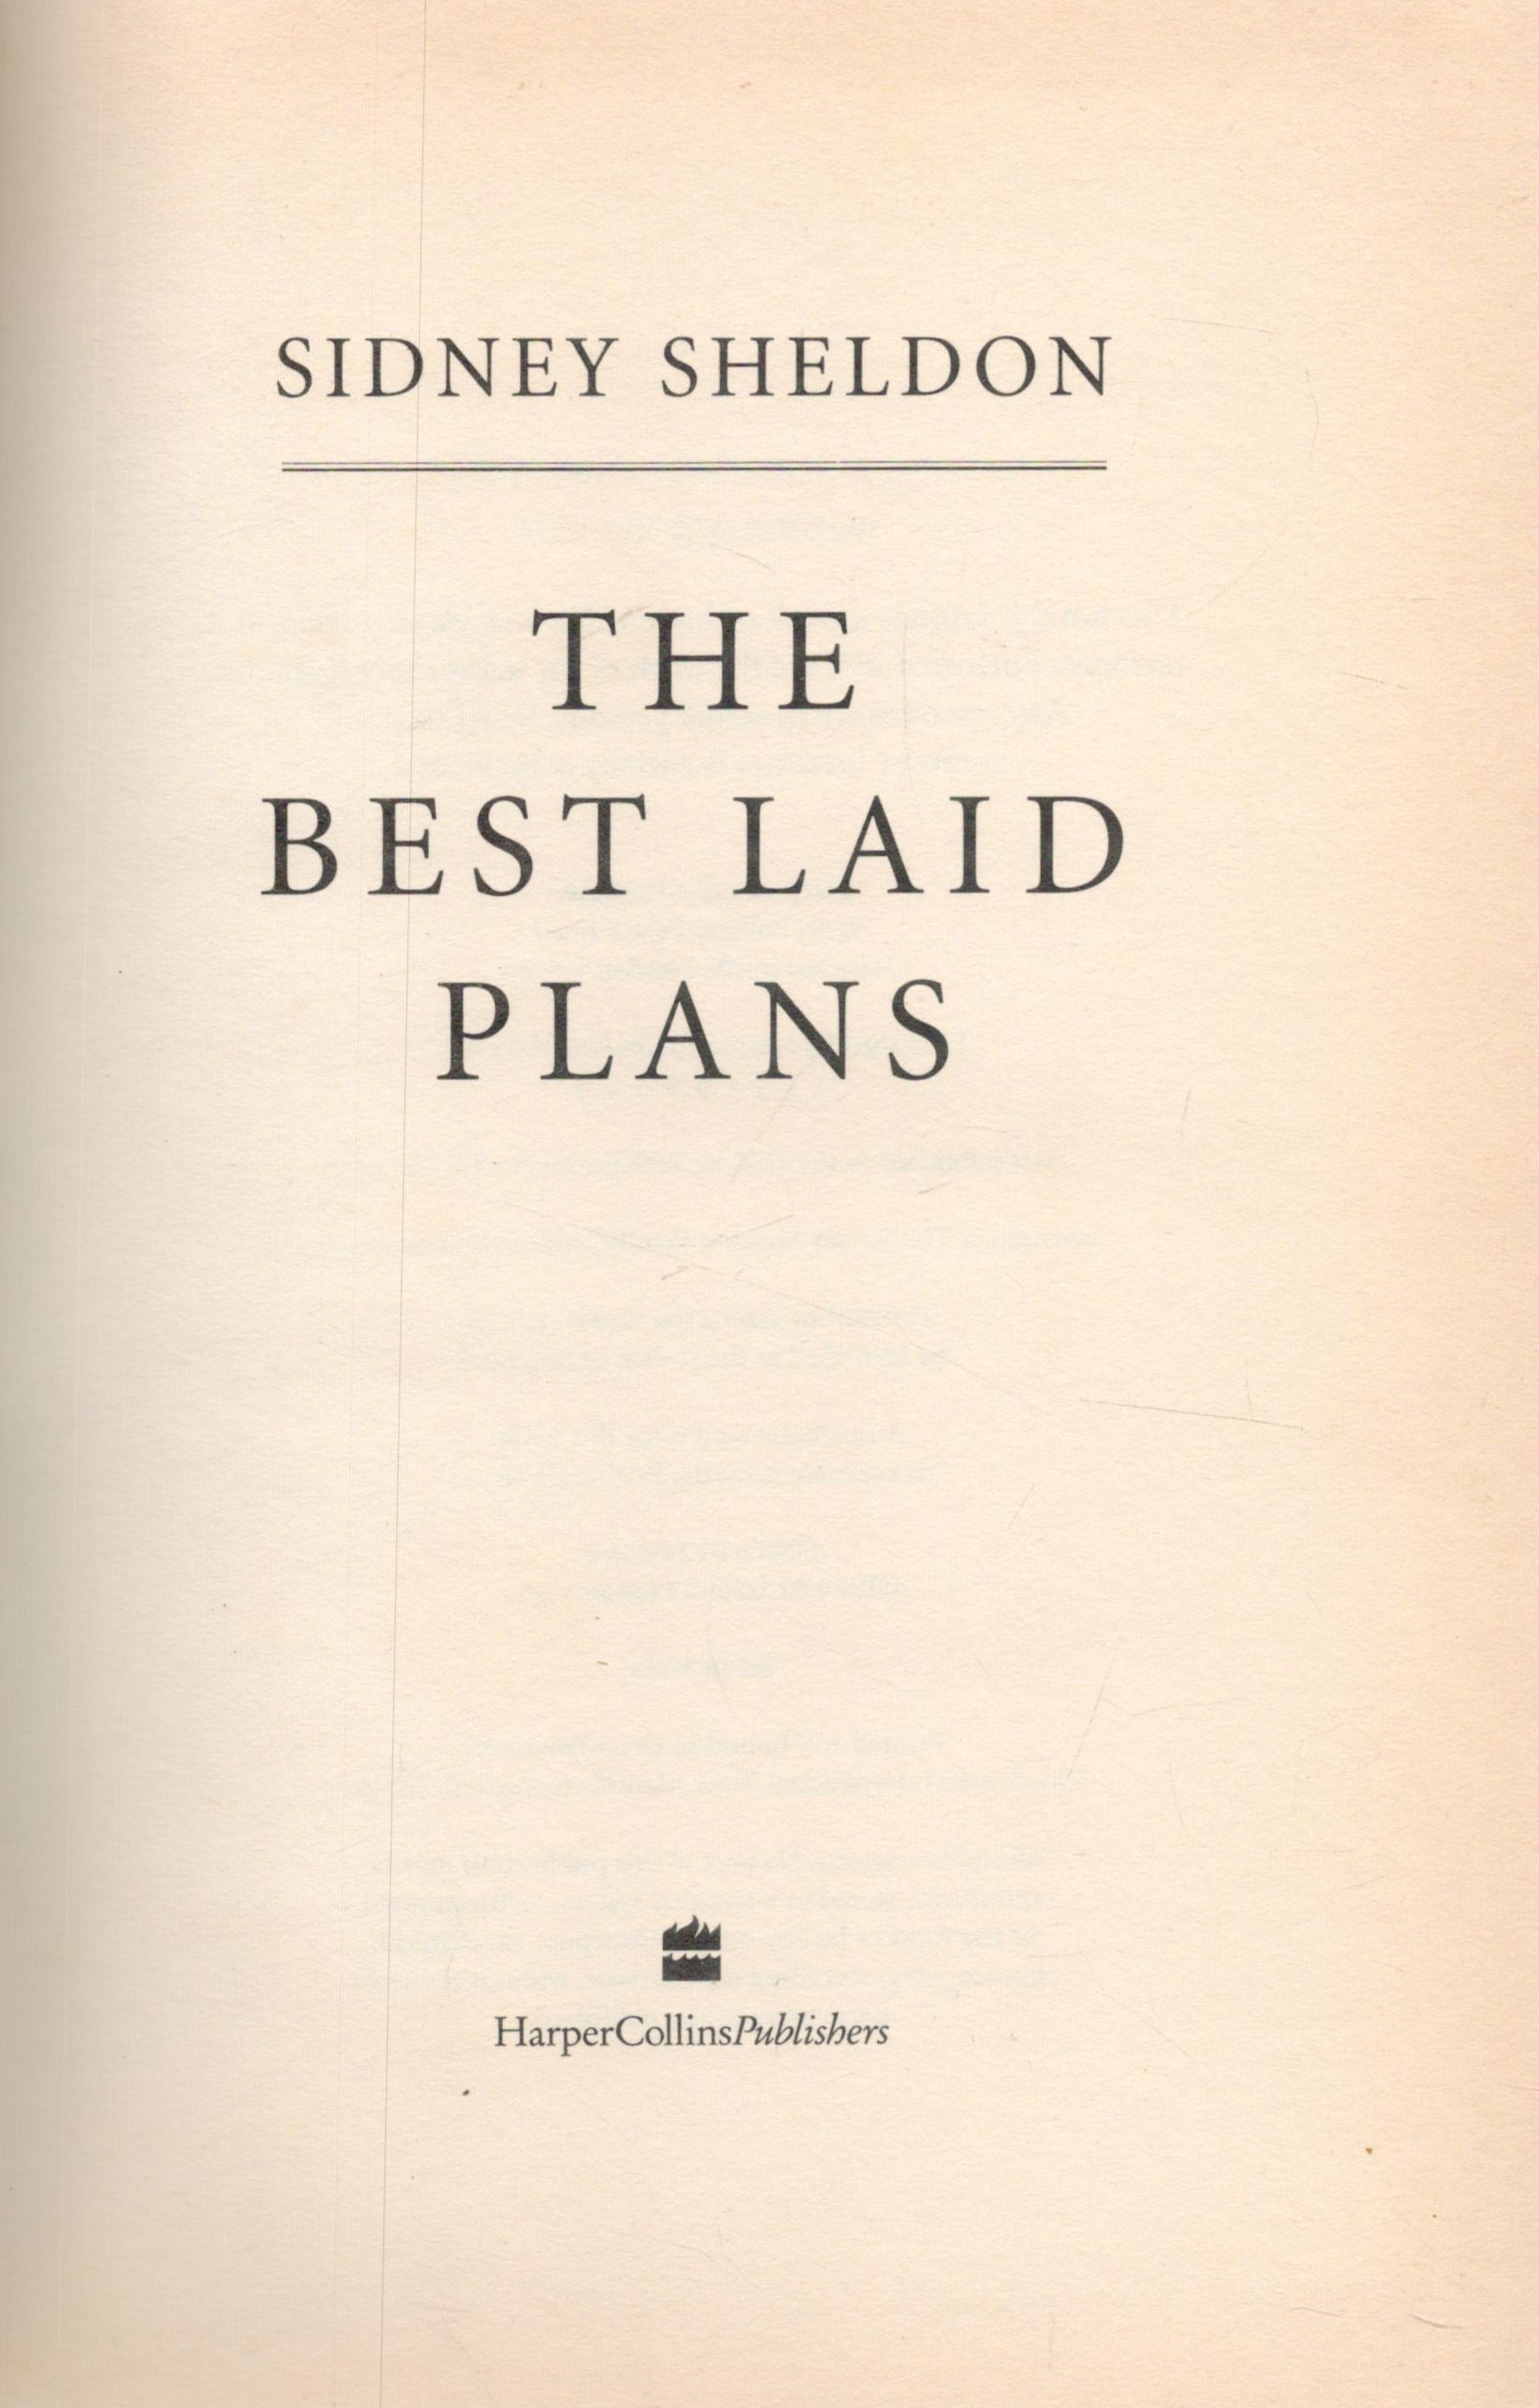 The Best Laid Plans by Sidney Sheldon 1997 First Edition Hardback Book with 358 pages published by - Image 2 of 3